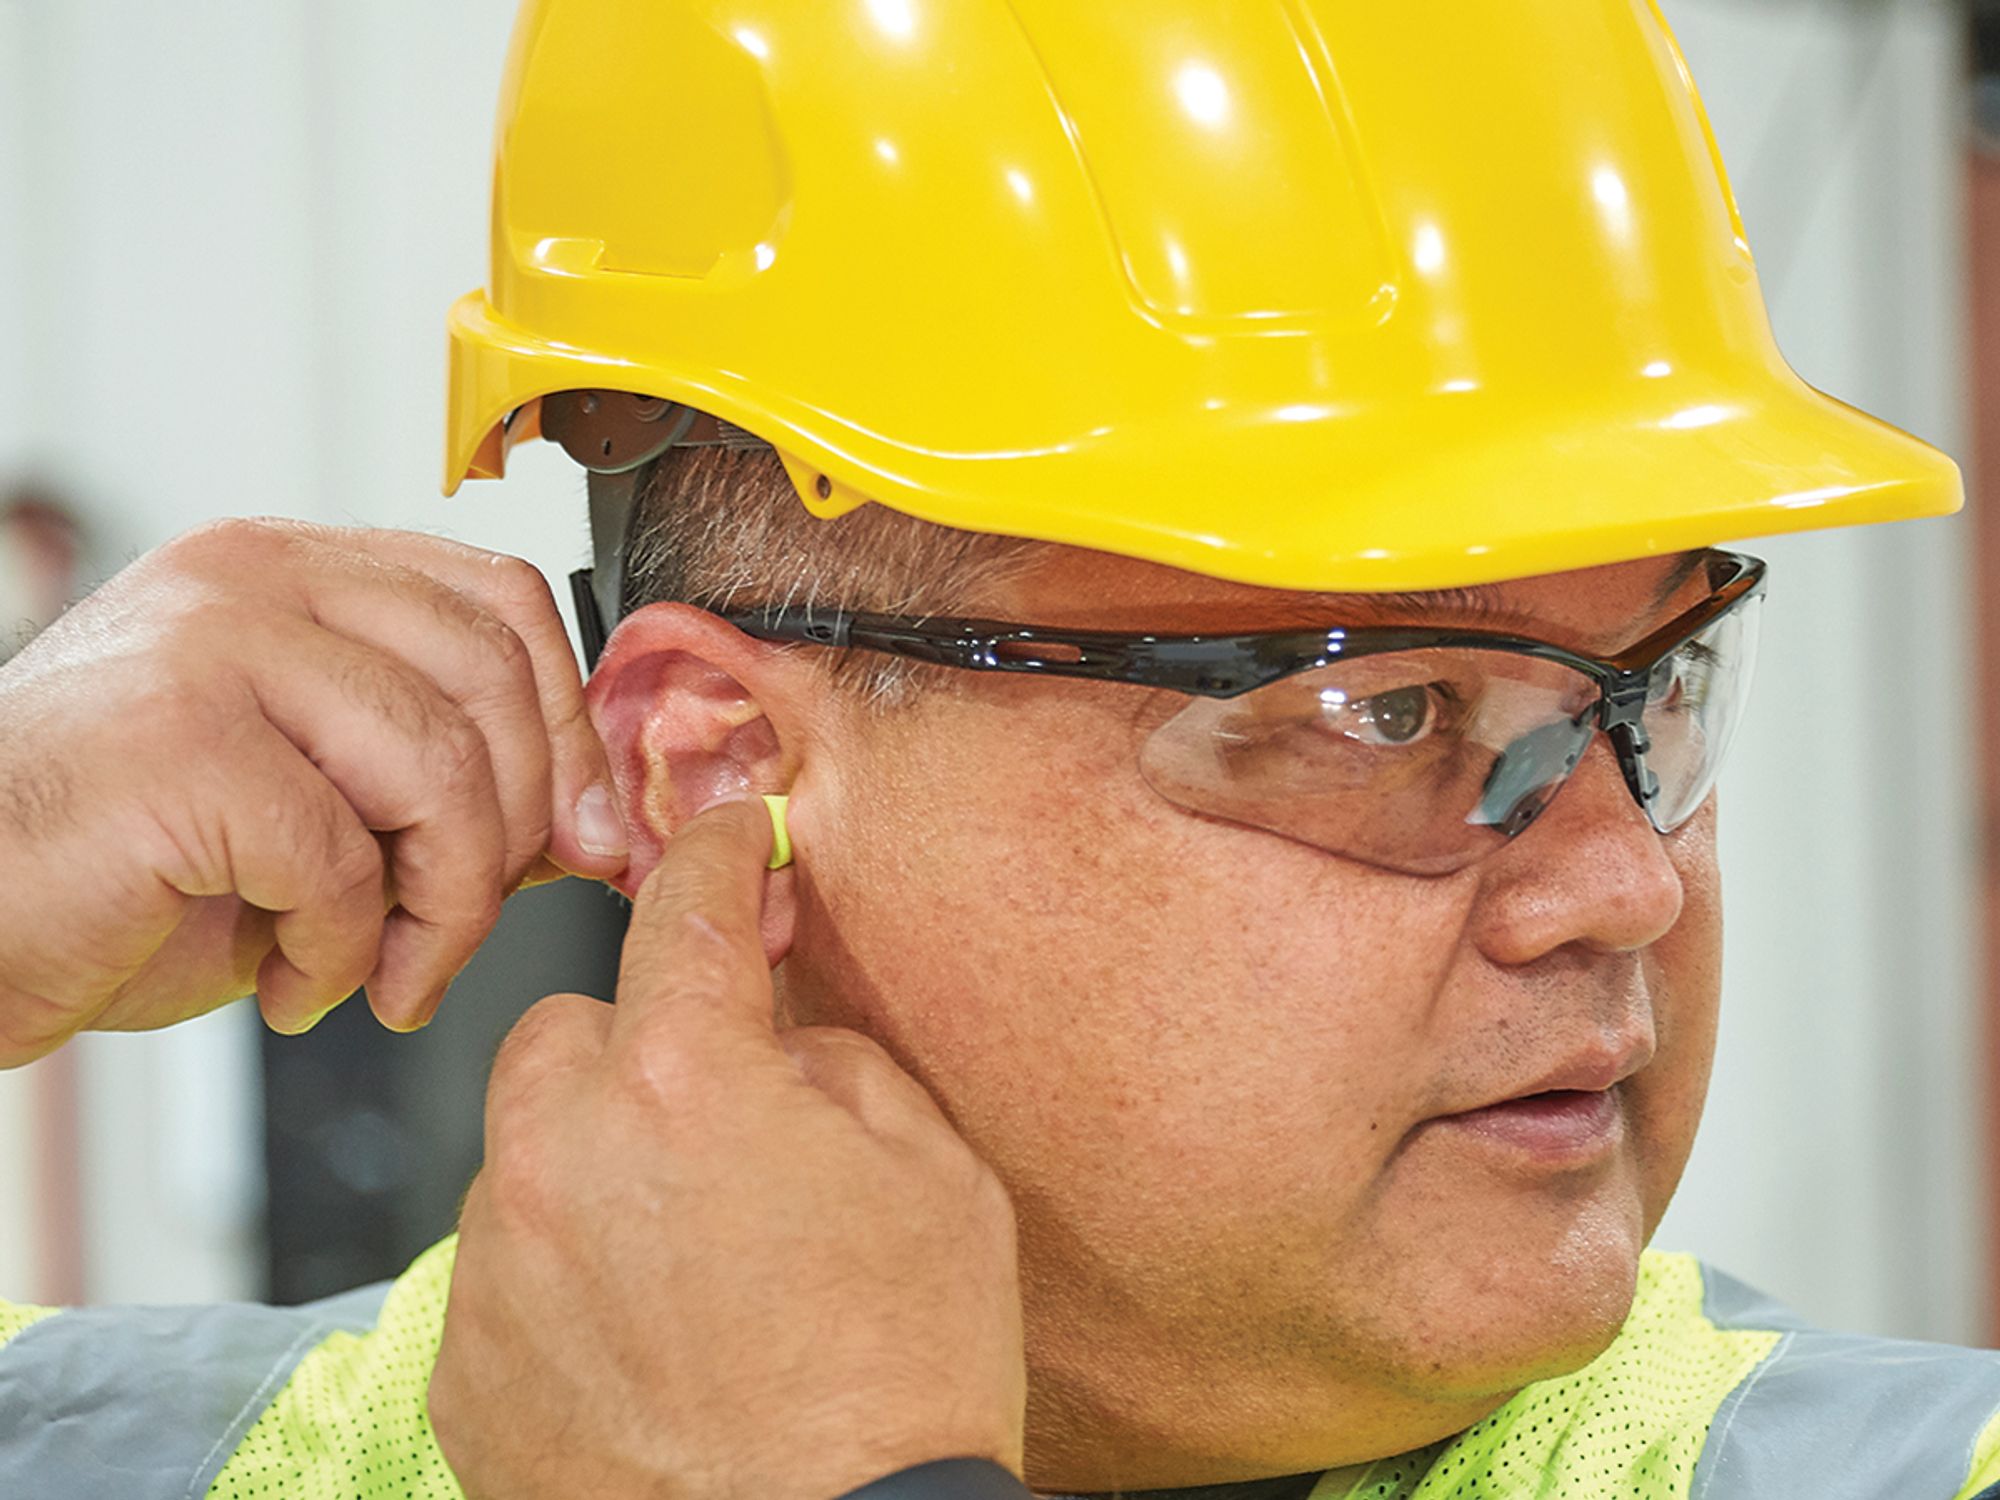 What is the basic requirement for recording hearing loss cases?